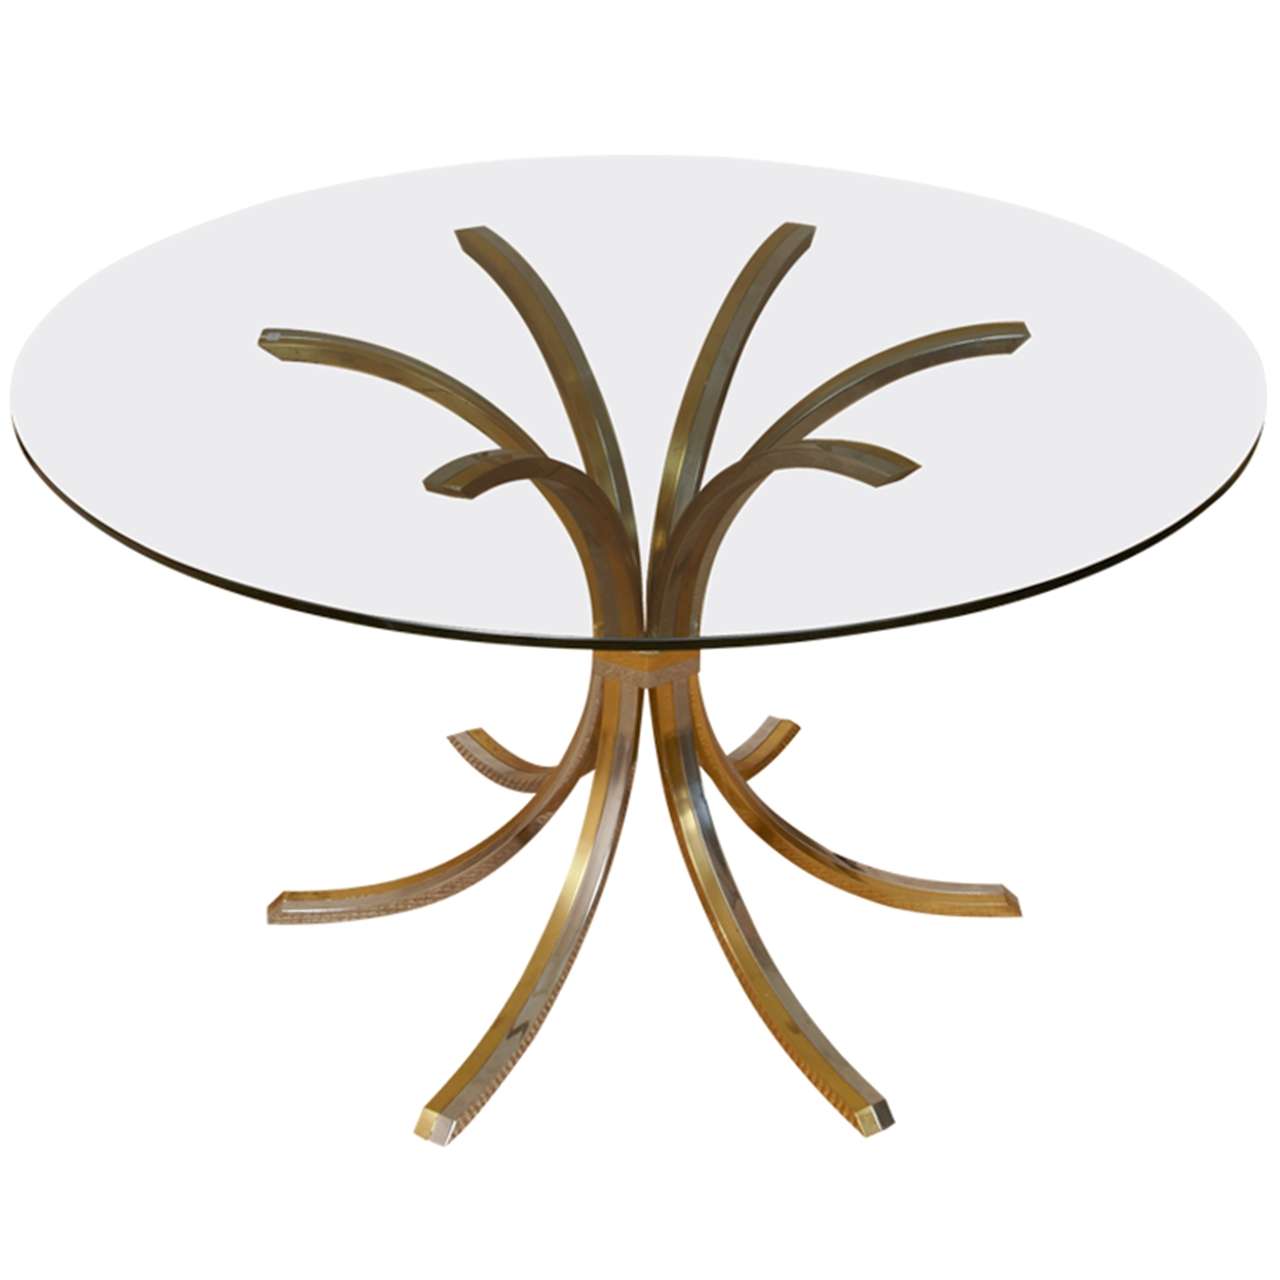 French Brass And Chrome Pedestal Tables At Cost Price For Sale